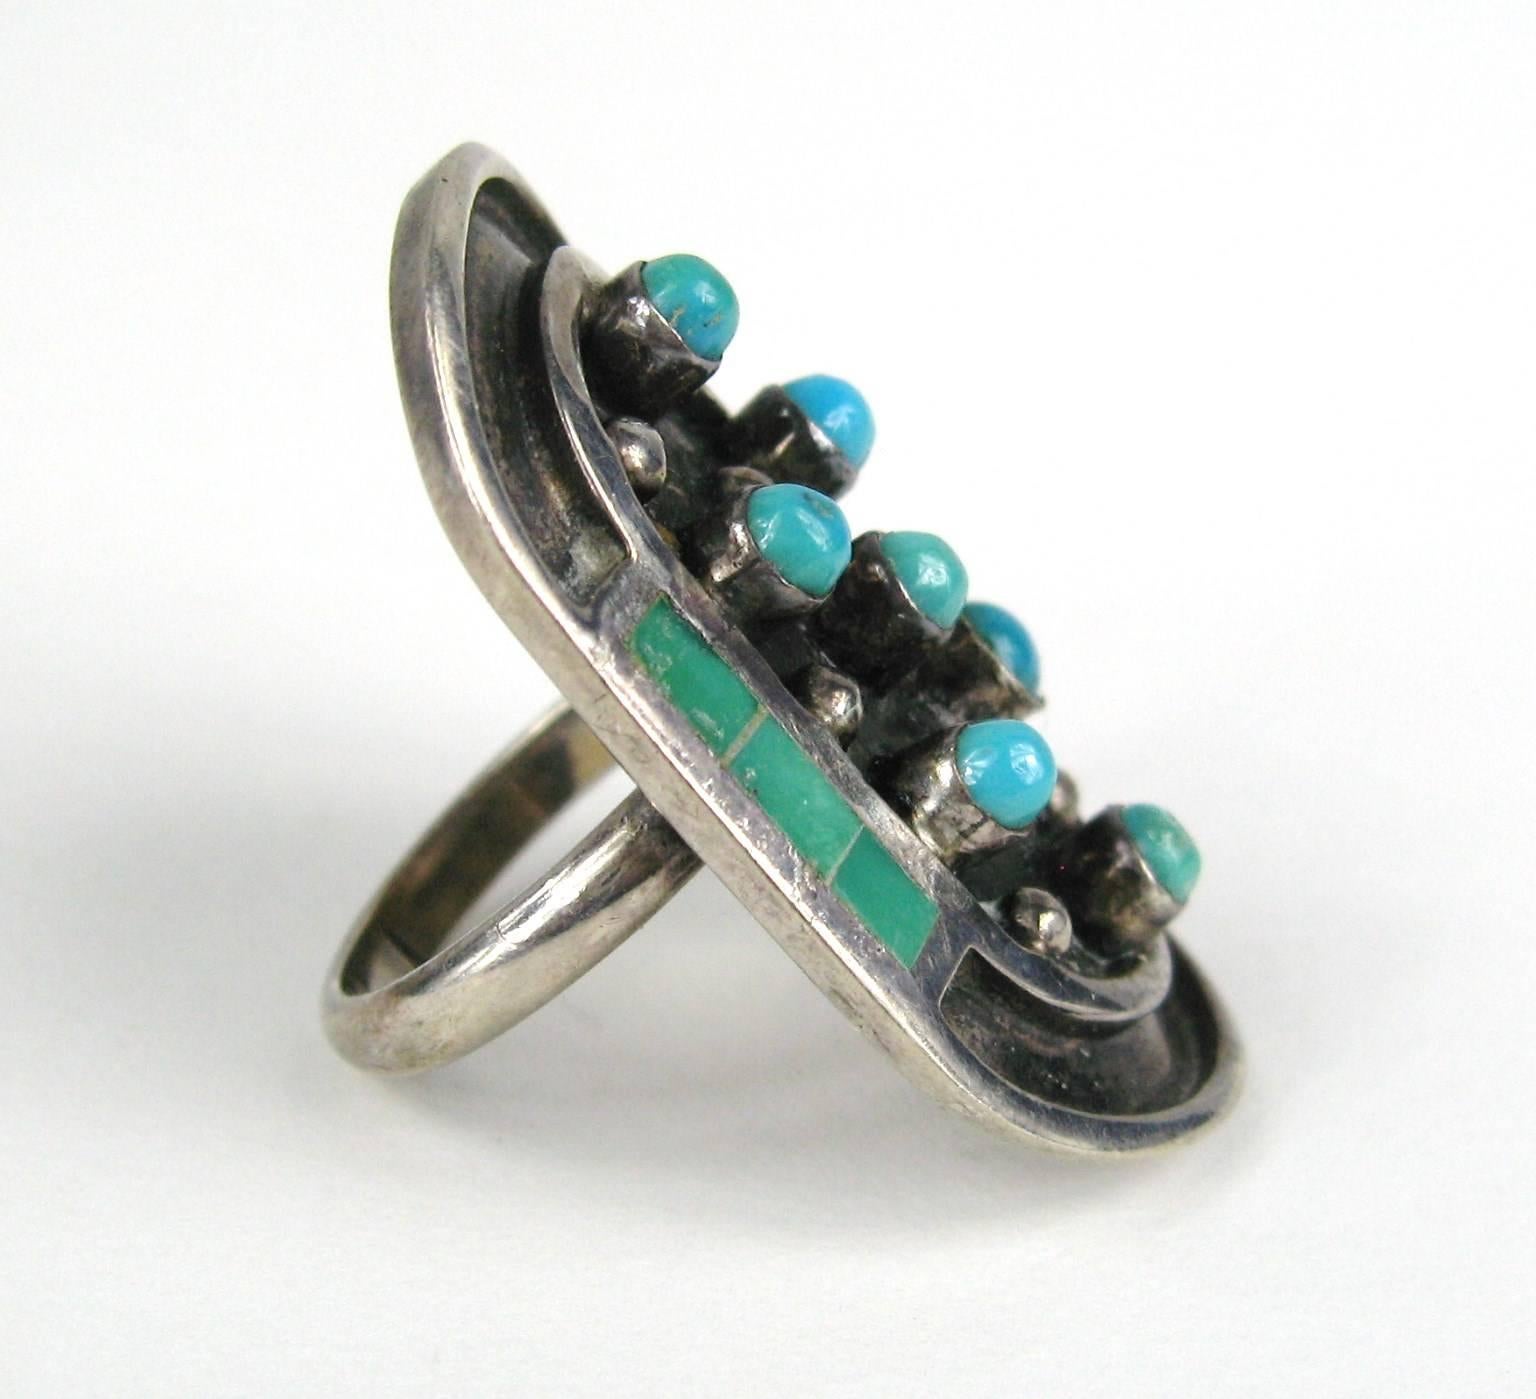 Sterling Silver Pawn Ring Turquoise Inlay and Bezel stones. Signed by Jobeth Mayes with a Stork Hallmark. Mayes Maize right of Stork. Featuring 7 Turquoise Nuggets. Each framed in Individual Bezels. 6 Hand Cut and Polished Turquoise Inlay. Measuring